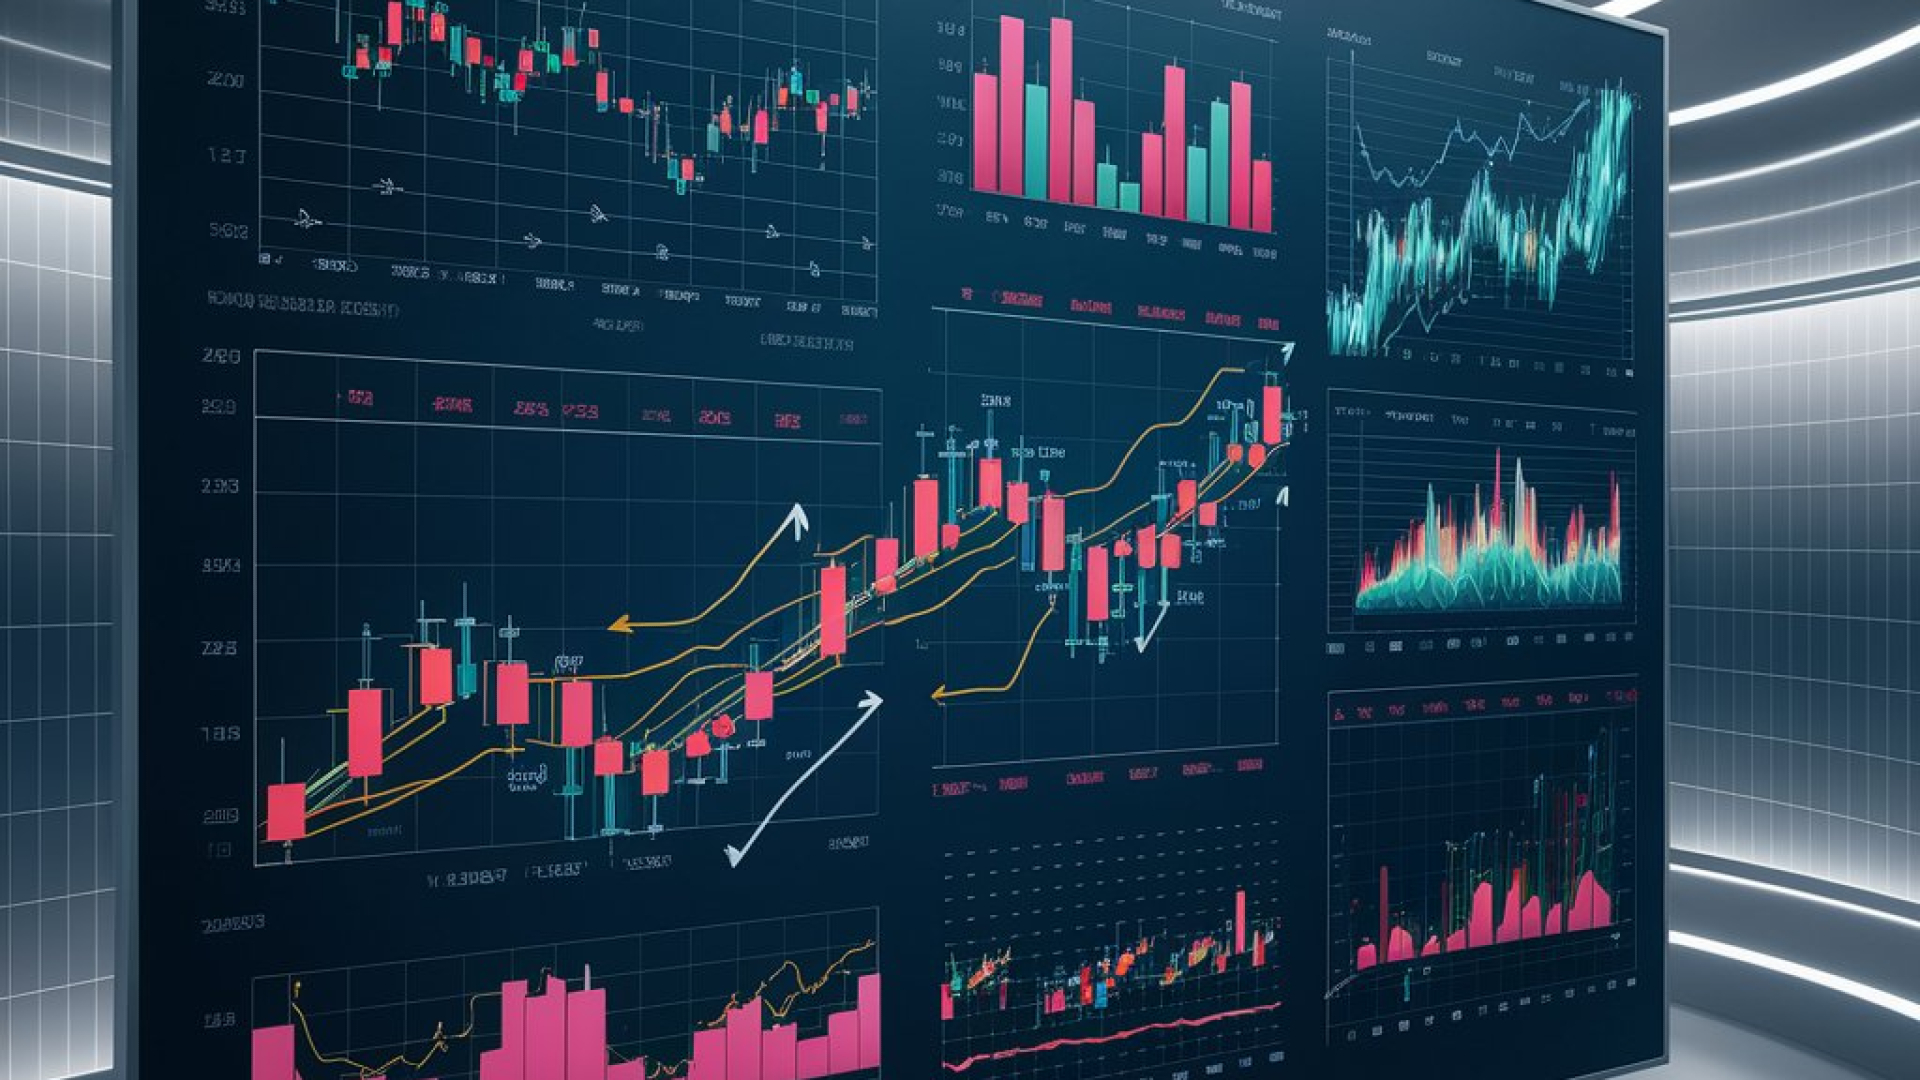 Technical Analysis Tools for Identifying Stock Trends